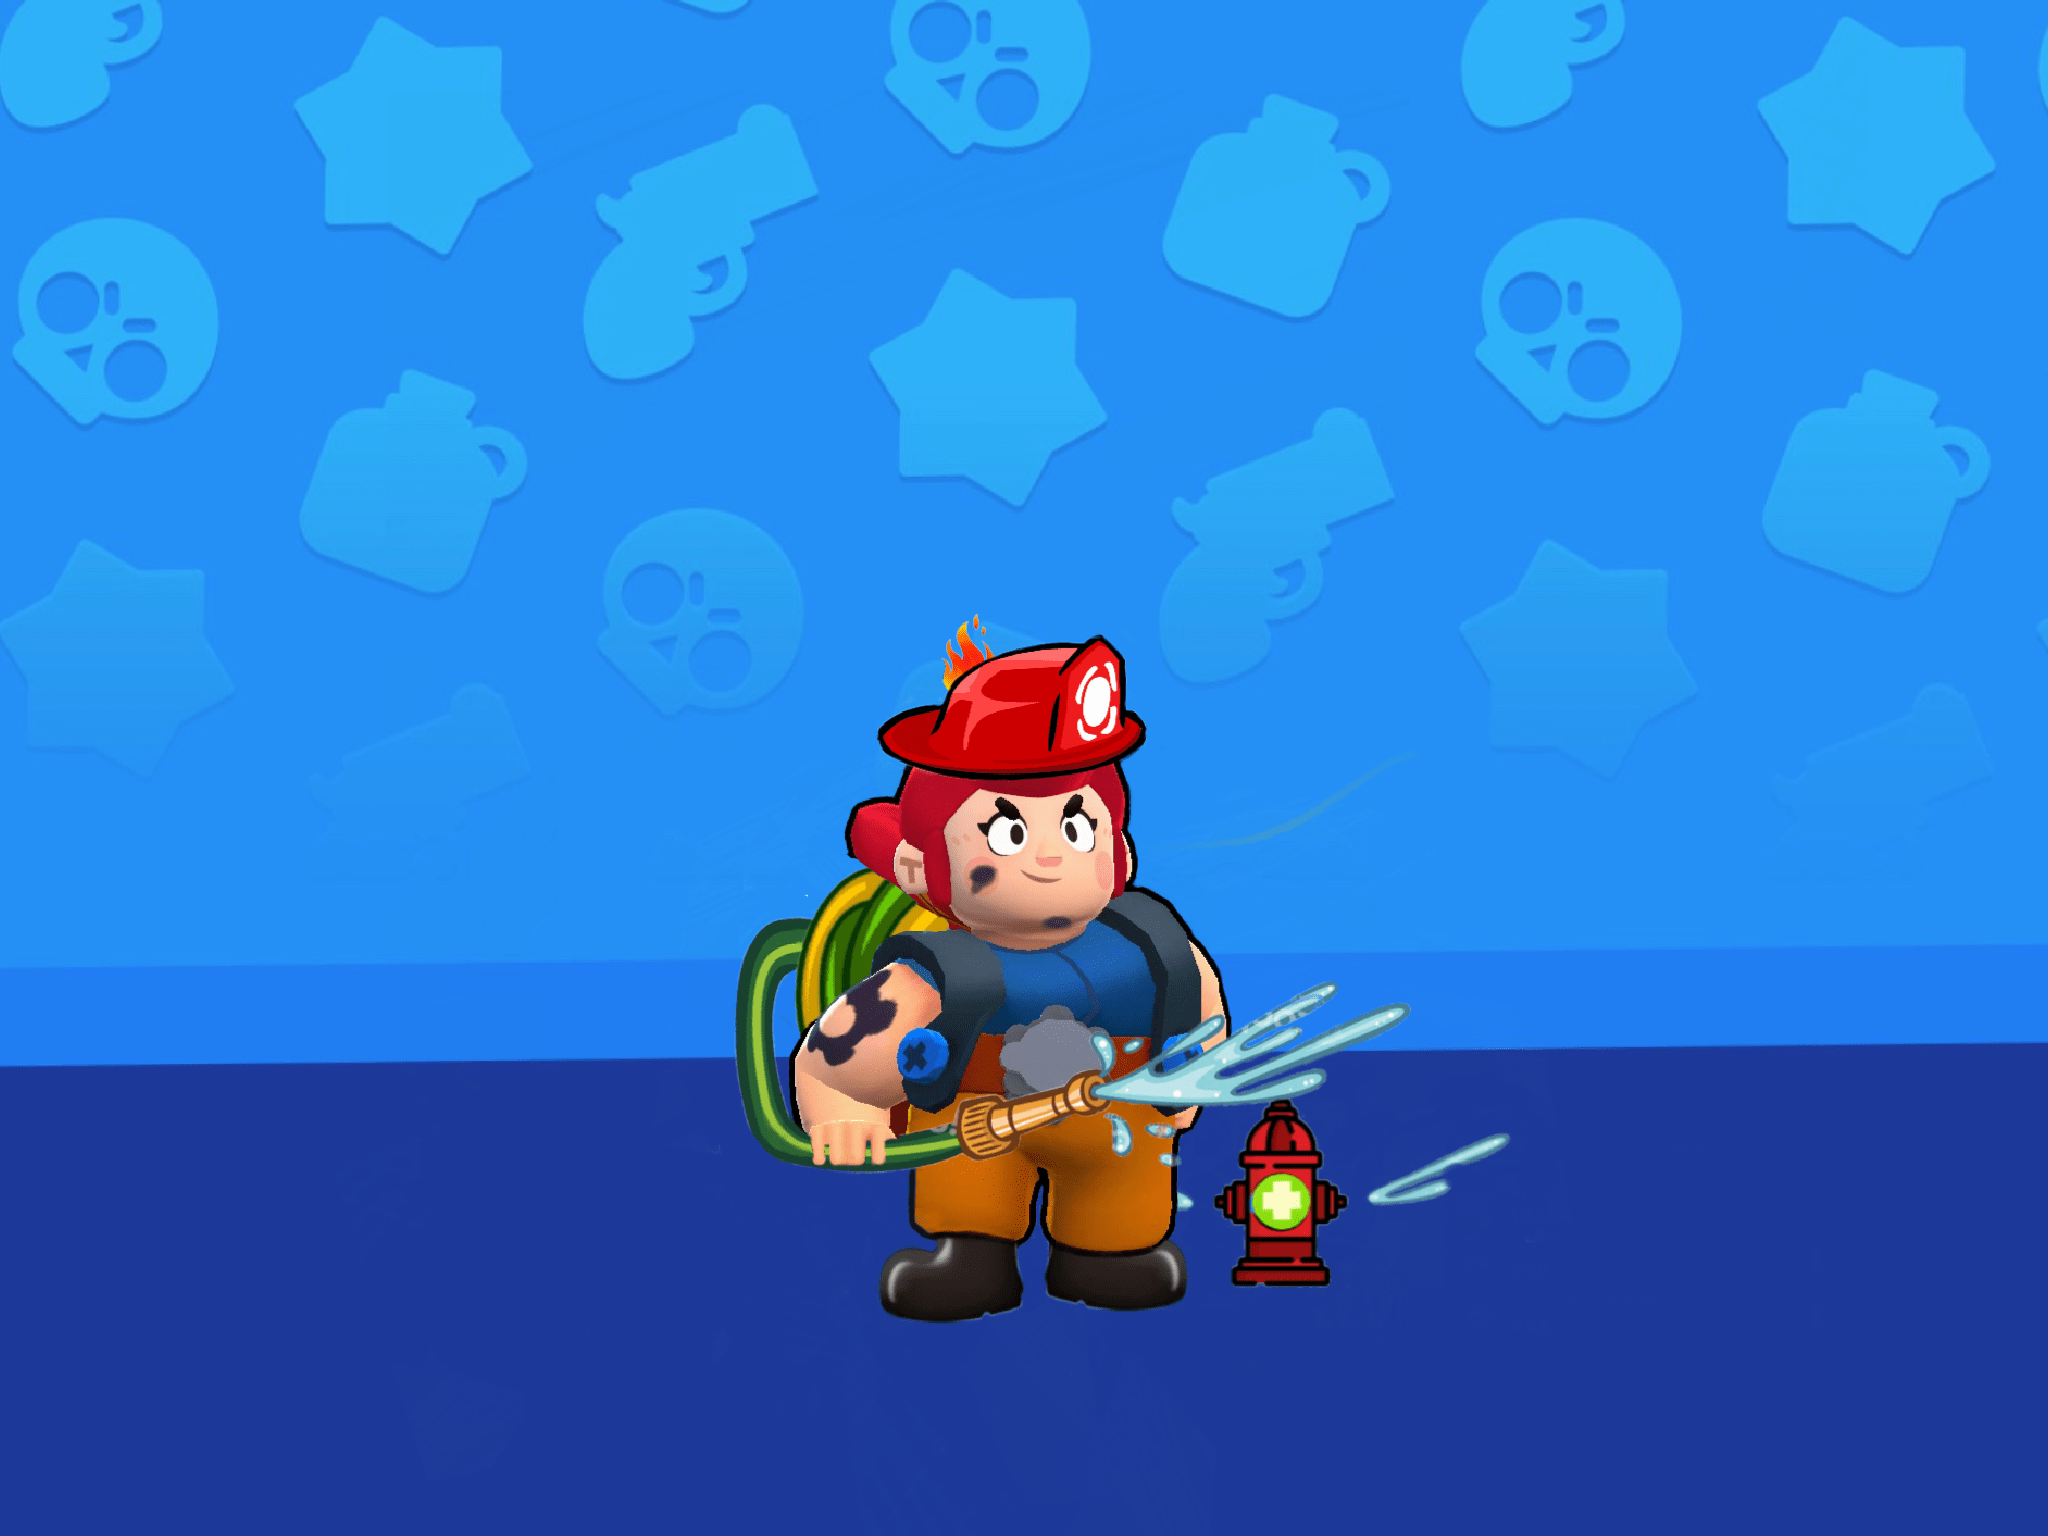 Pam Brawl Stars Wallpapers Top Free Pam Brawl Stars Backgrounds Wallpaperaccess - how old is pam in brawl stars